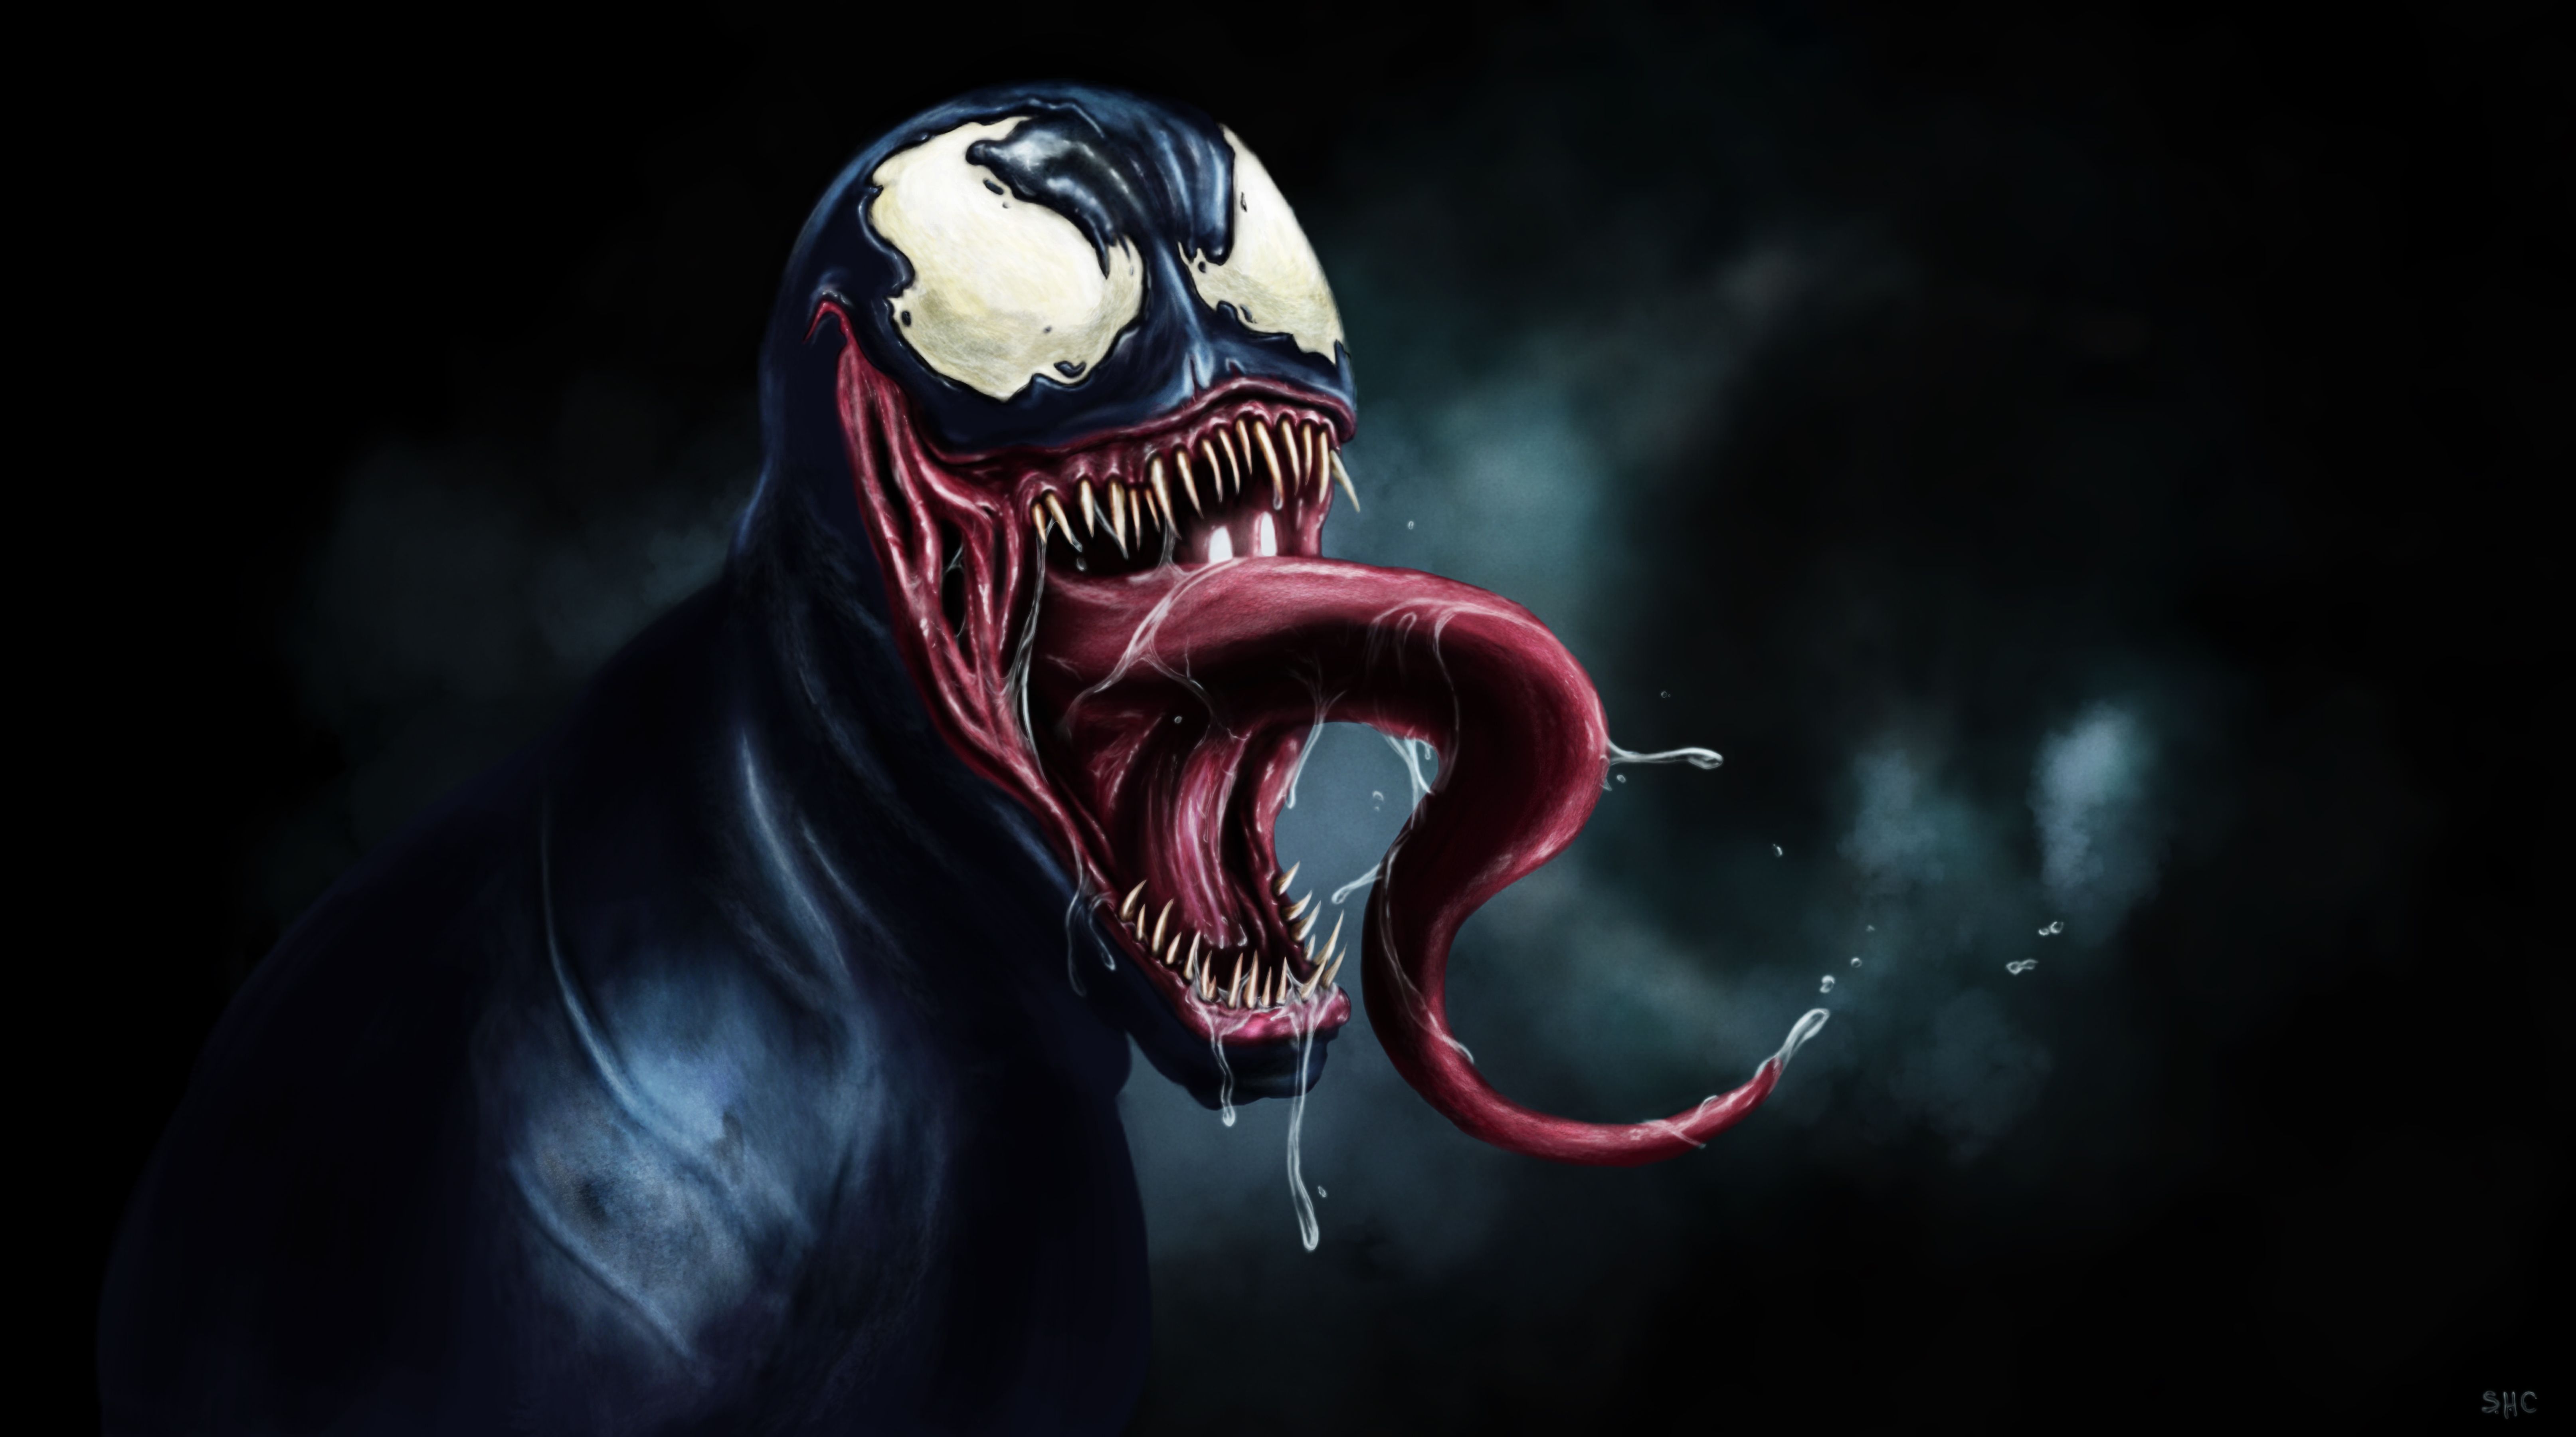 'Venom' to be an R-Rated Sci-Fi Horror Film | Cultjer